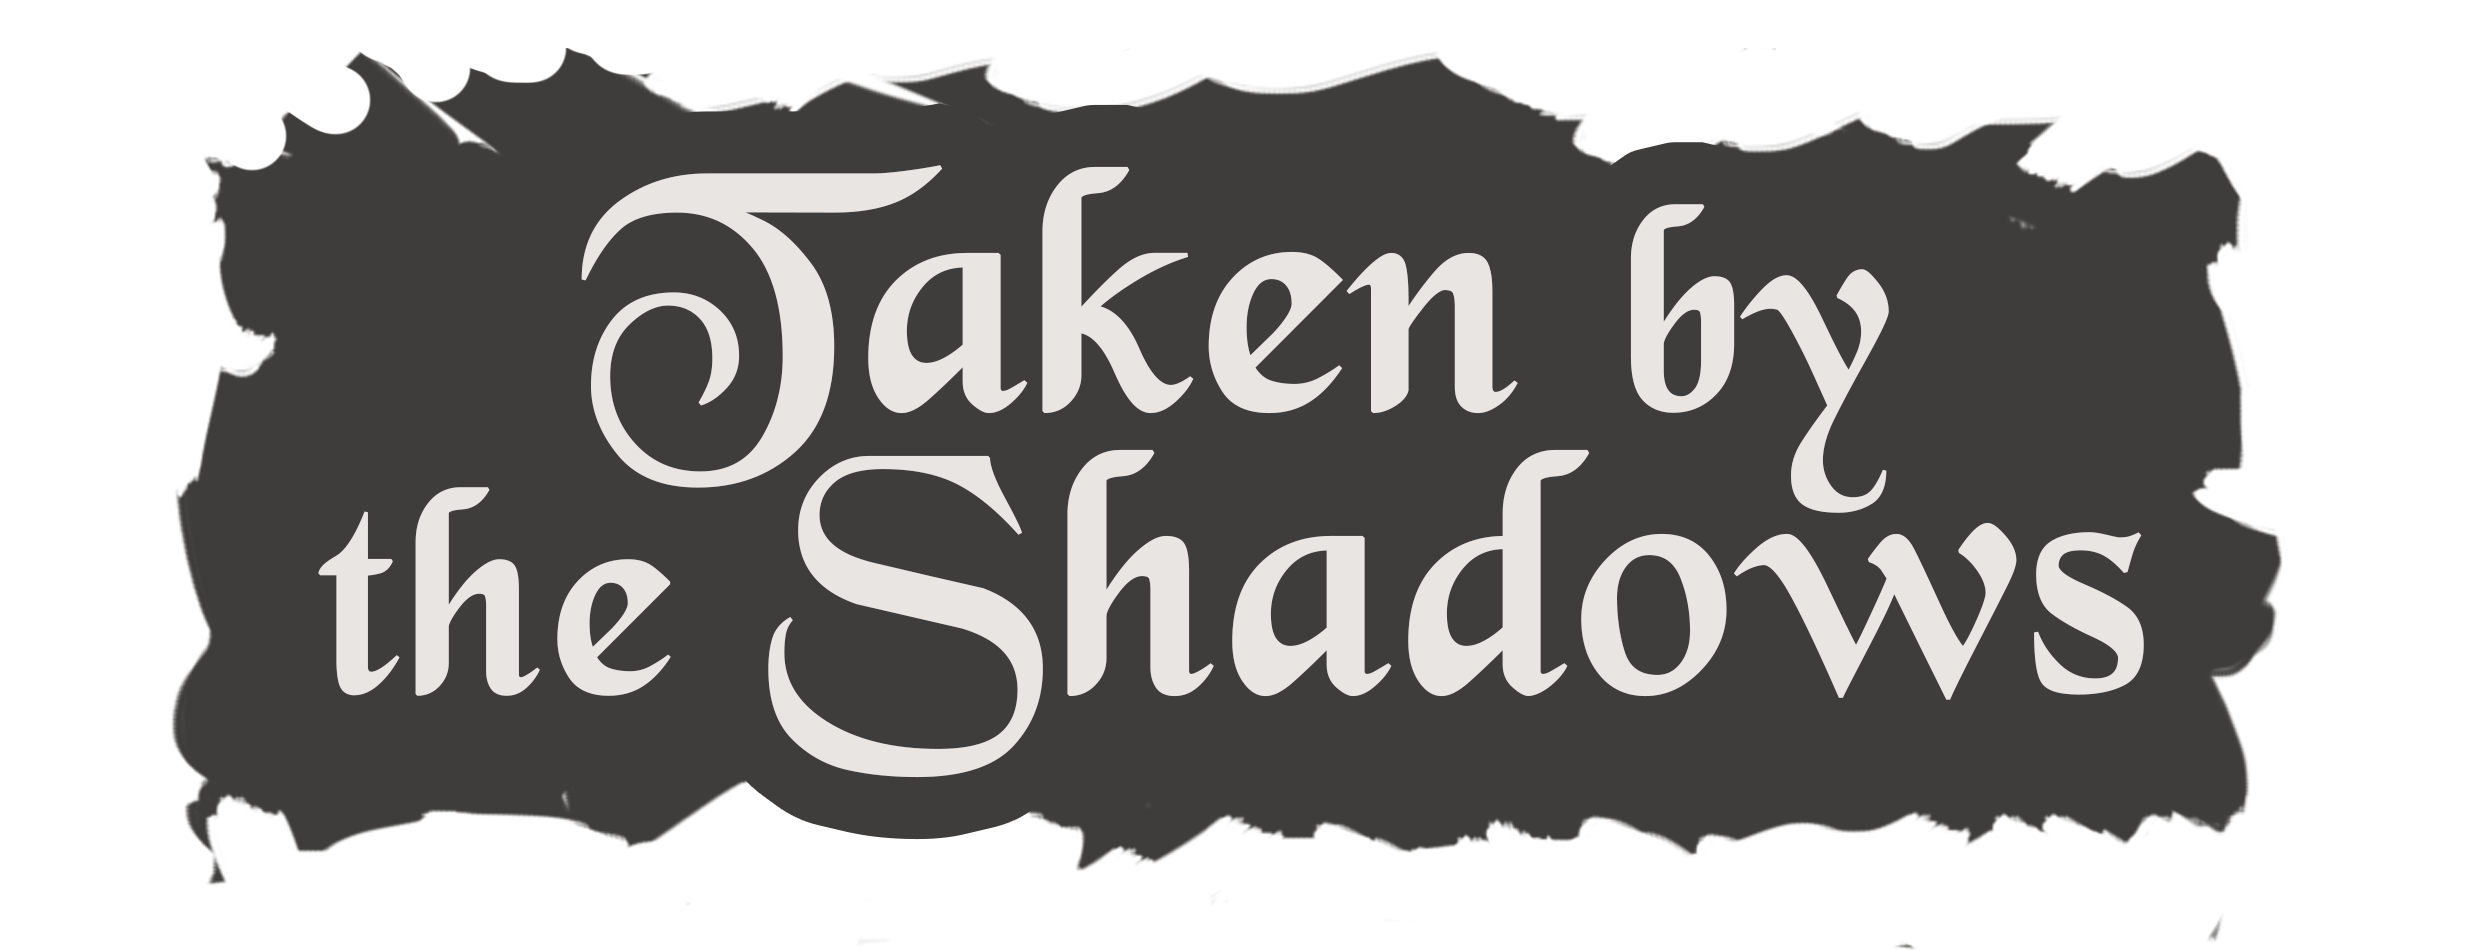 Taken by the shadows: Professional Level